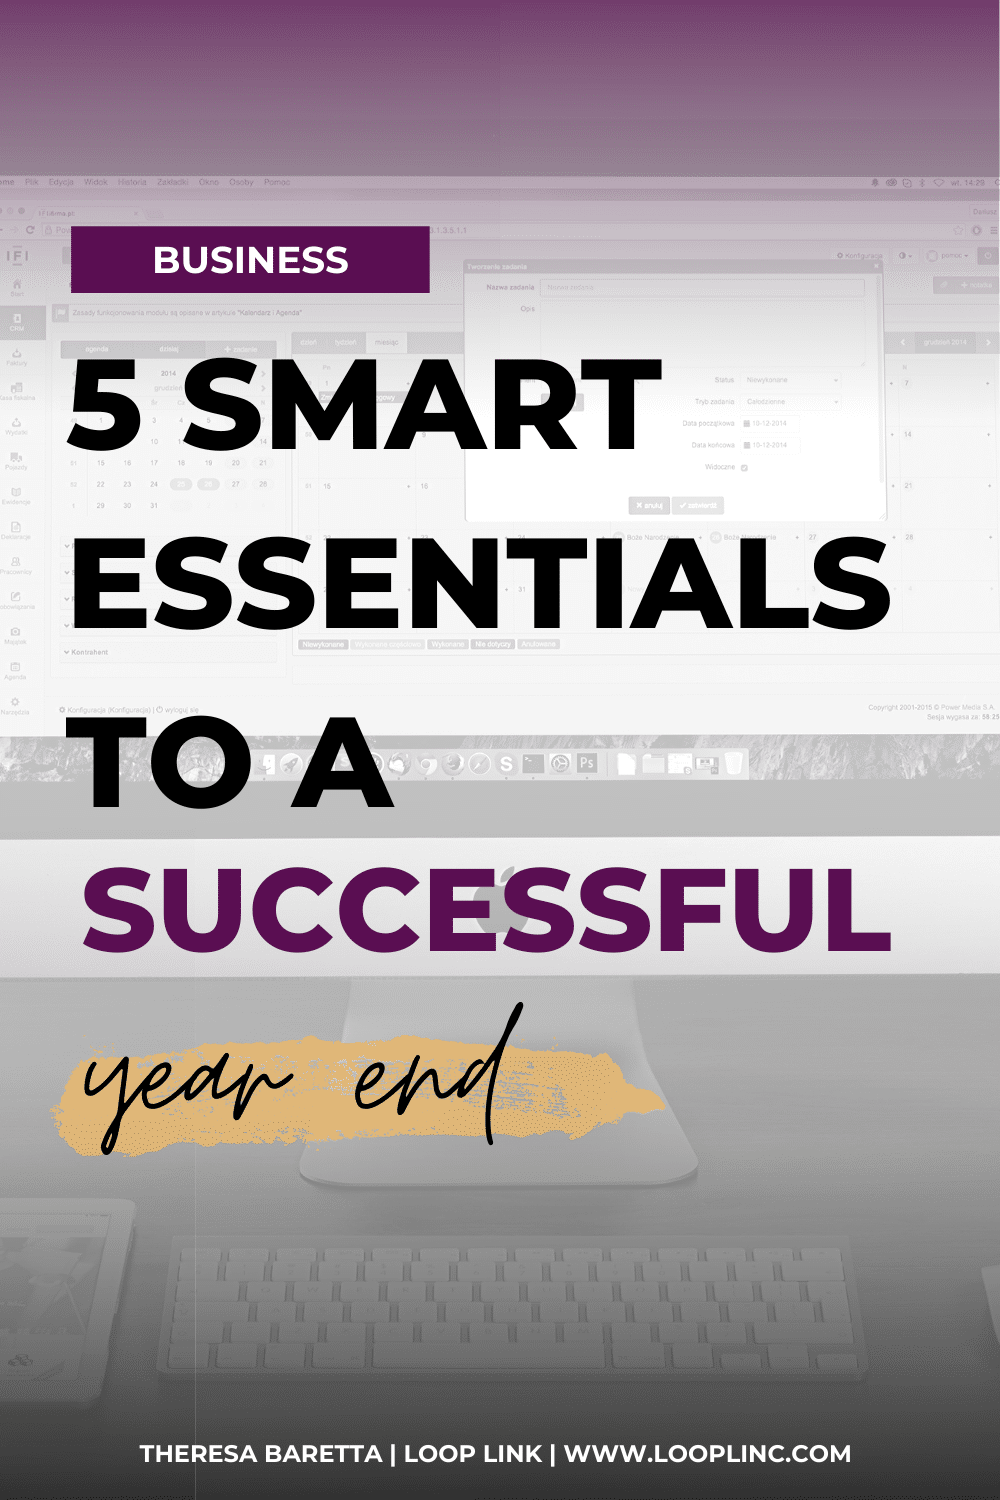 5 Smart Essentials to A Successful Business Year End